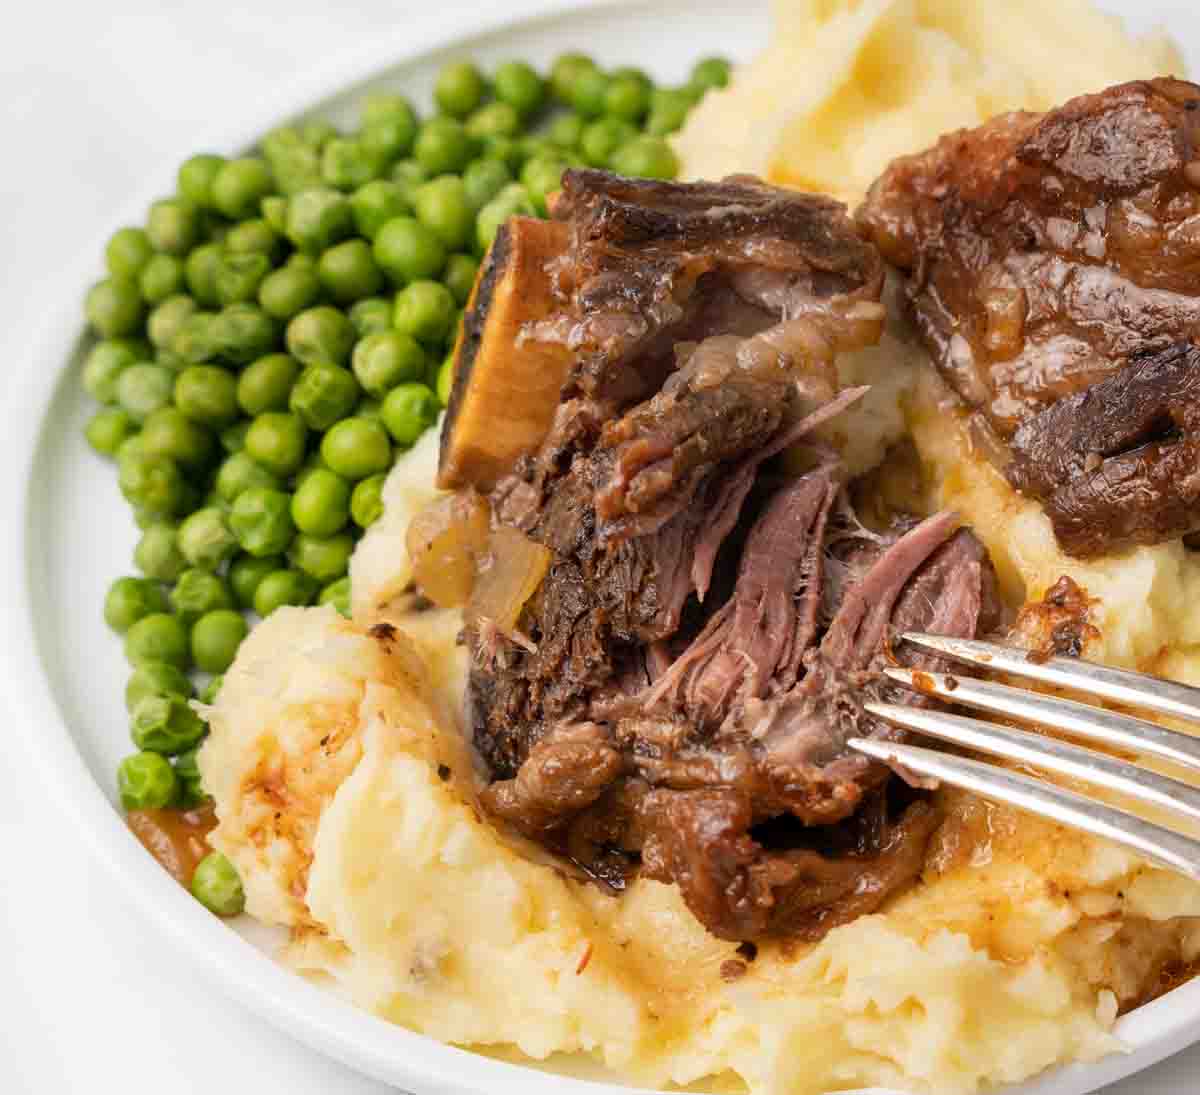 fork taking piece of fall apart meat from short rib on a bed of mashed potatoes